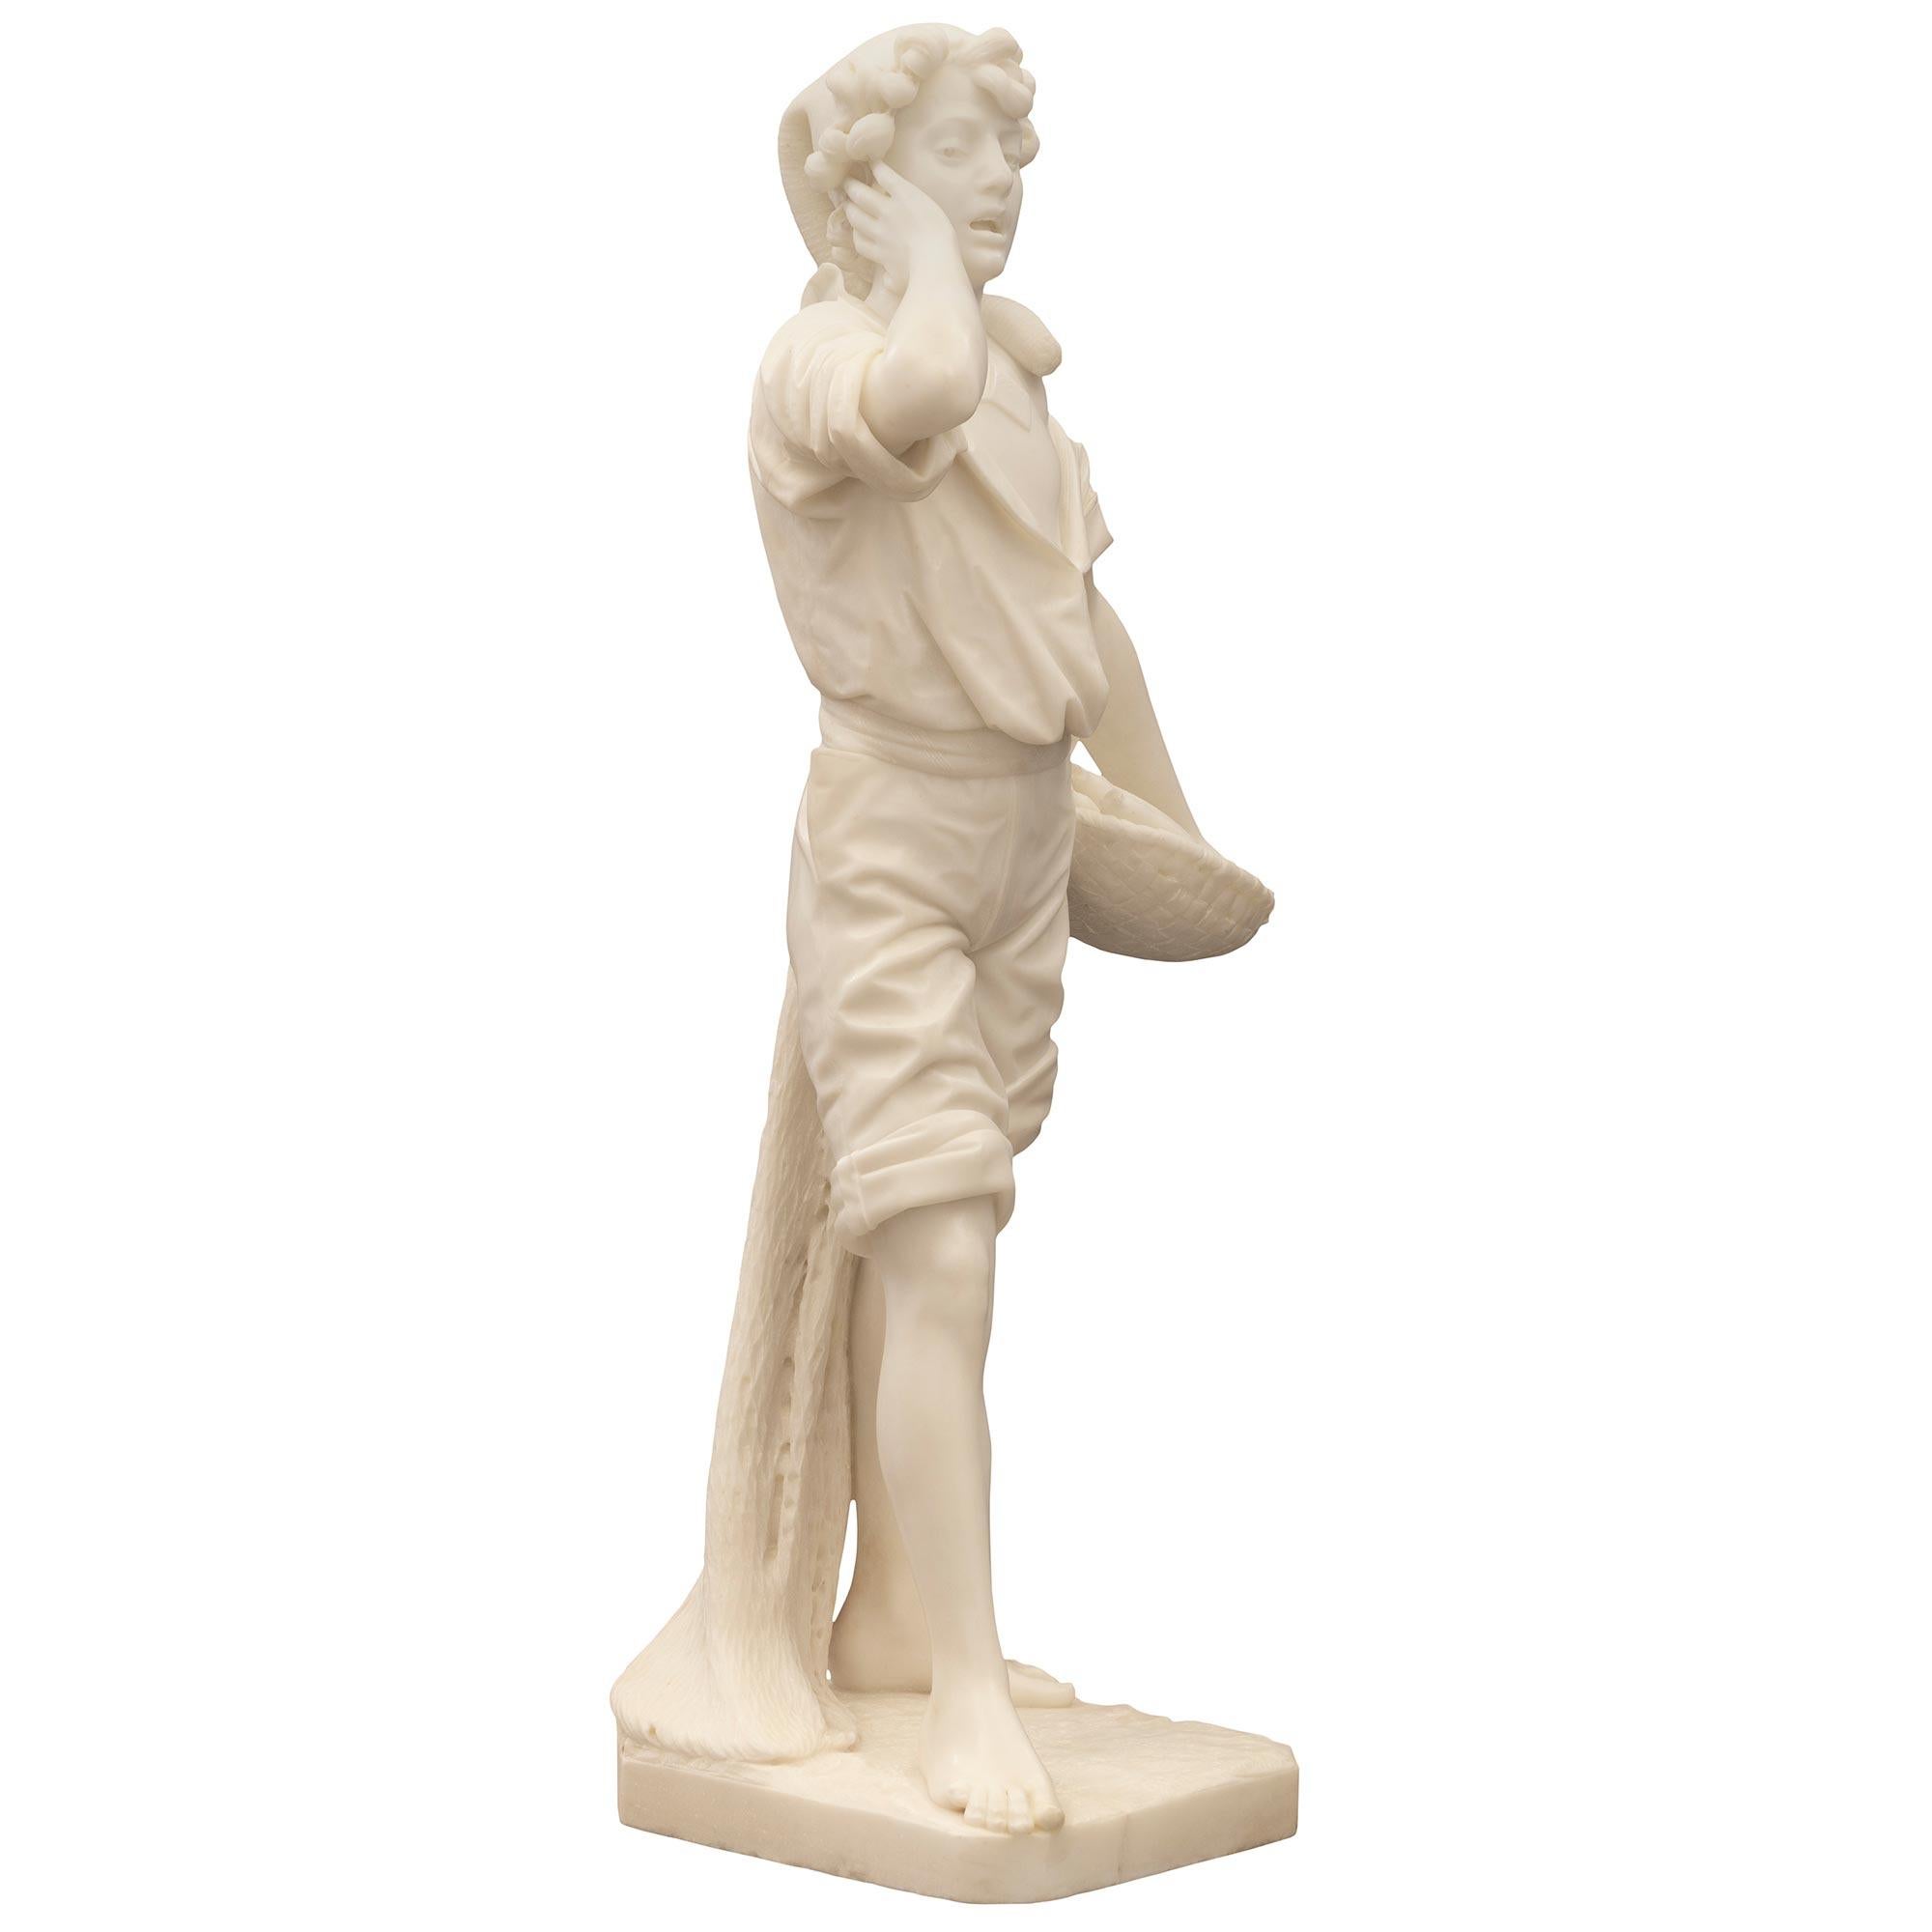 A stunning and extremely high quality Italian 19th century solid white Carrara marble statue of a young fisherman. The statue is raised by a square base with cut corners and a fine ground like design. Above is the charming young boy dressed in